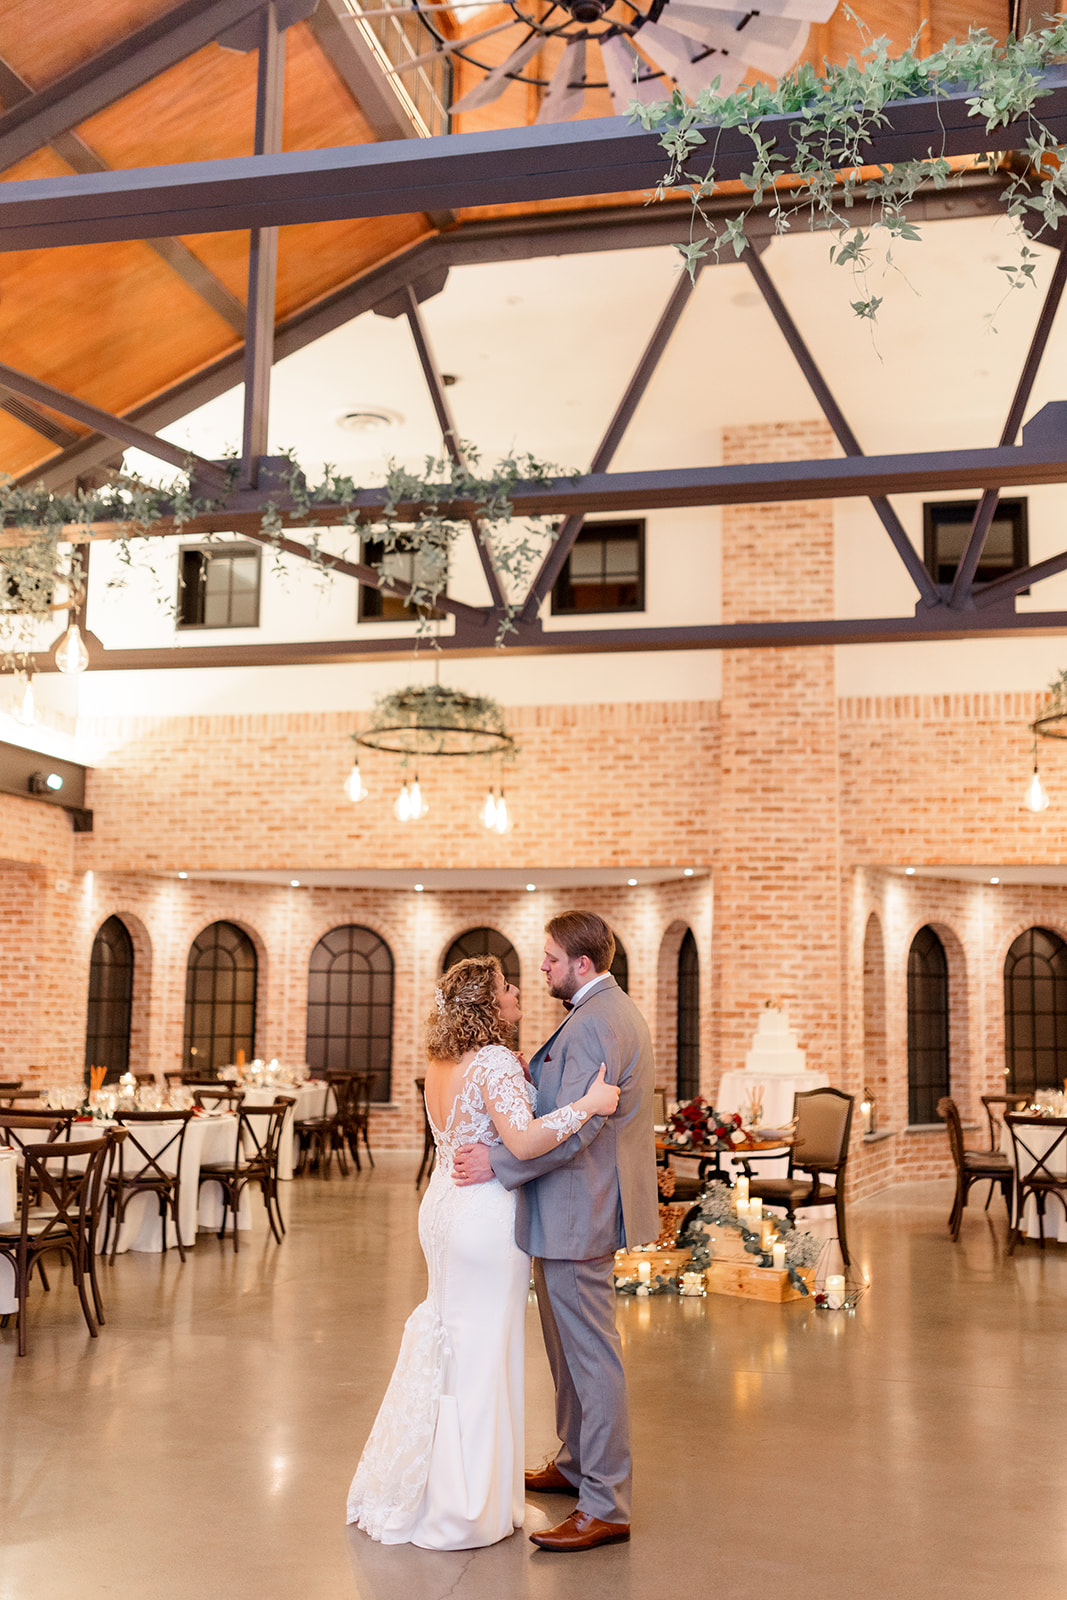 Newlyweds dance together in the empty The Refinery At Perona Farms wedding reception room